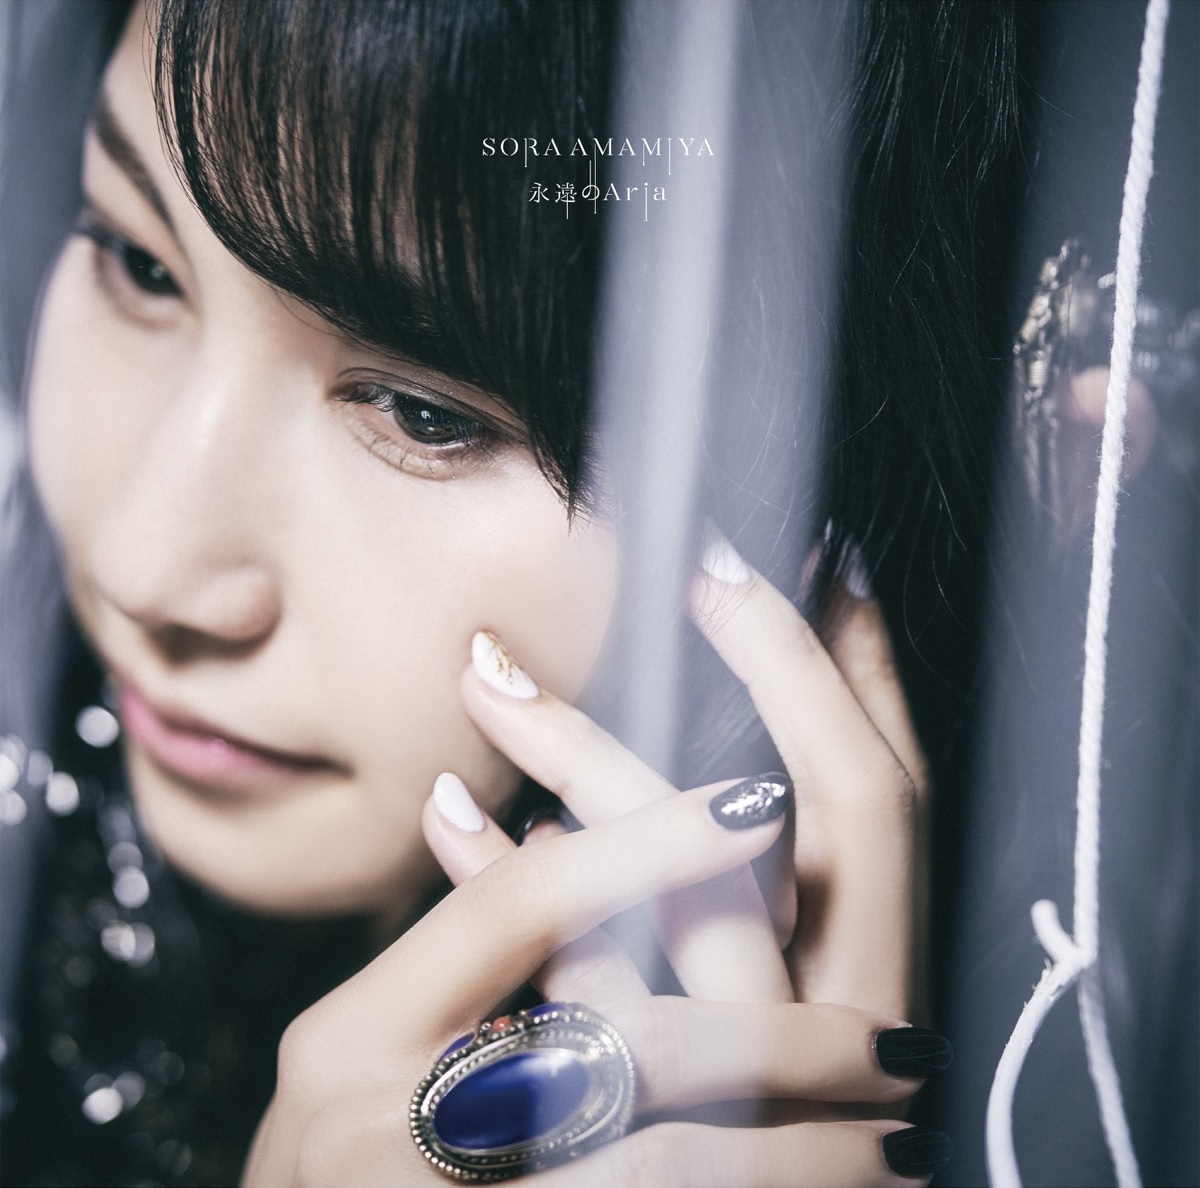 Cover art for『Sora Amamiya - 永遠のAria』from the release『Eien no Aria